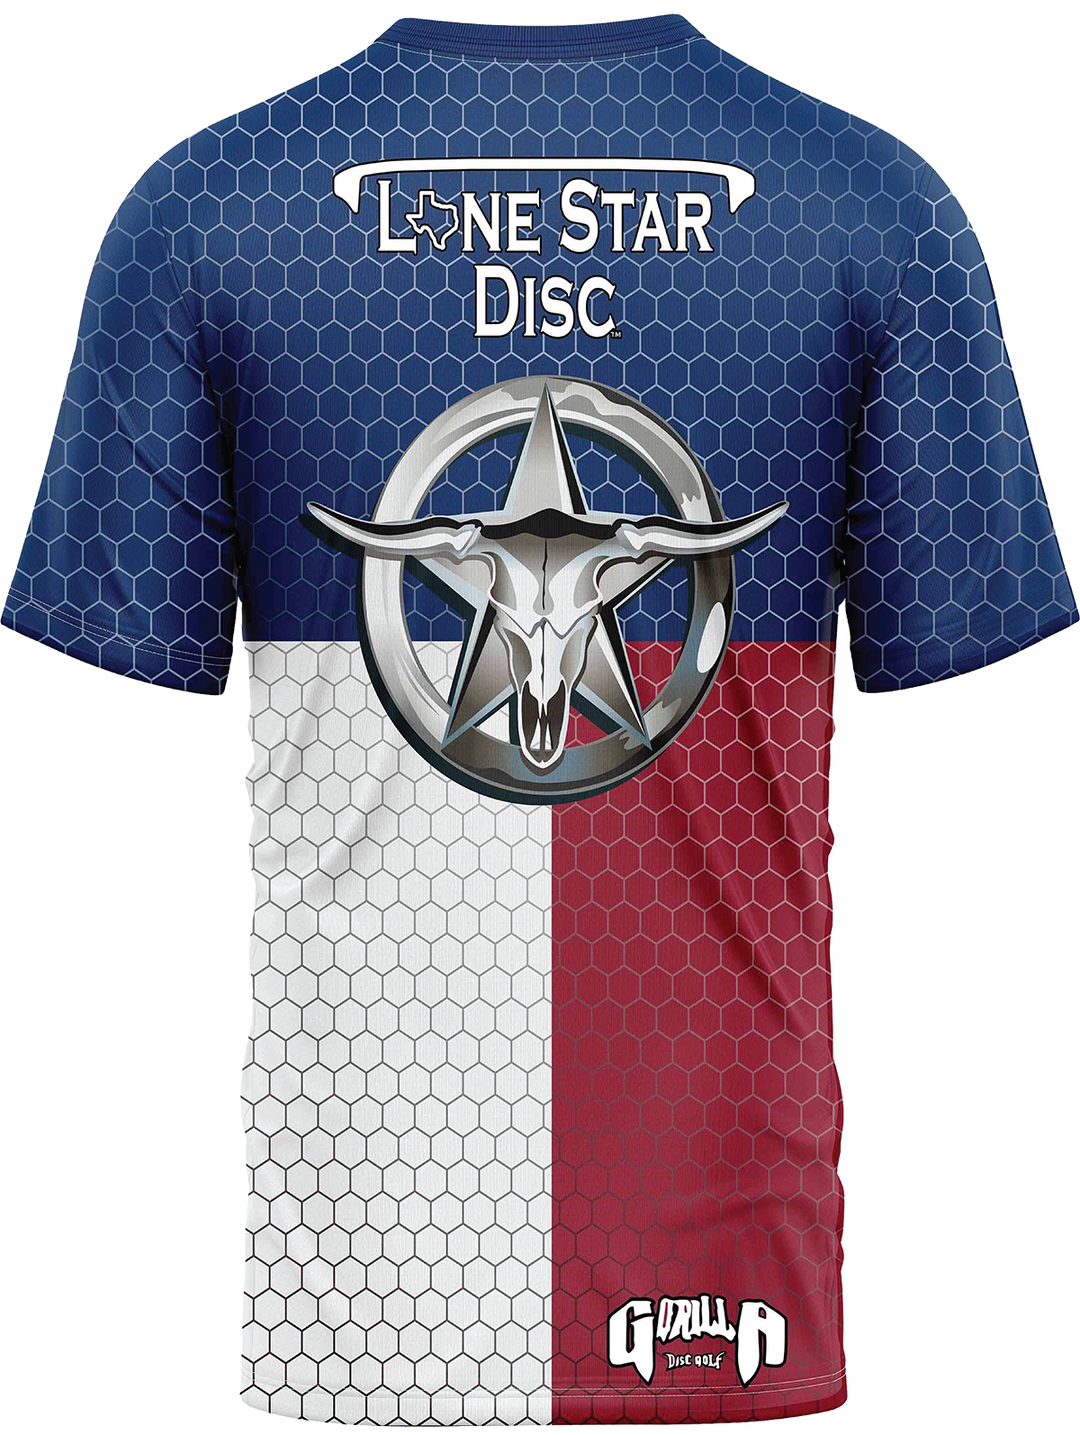 Lone Star Disc Texan Athletic Jersey